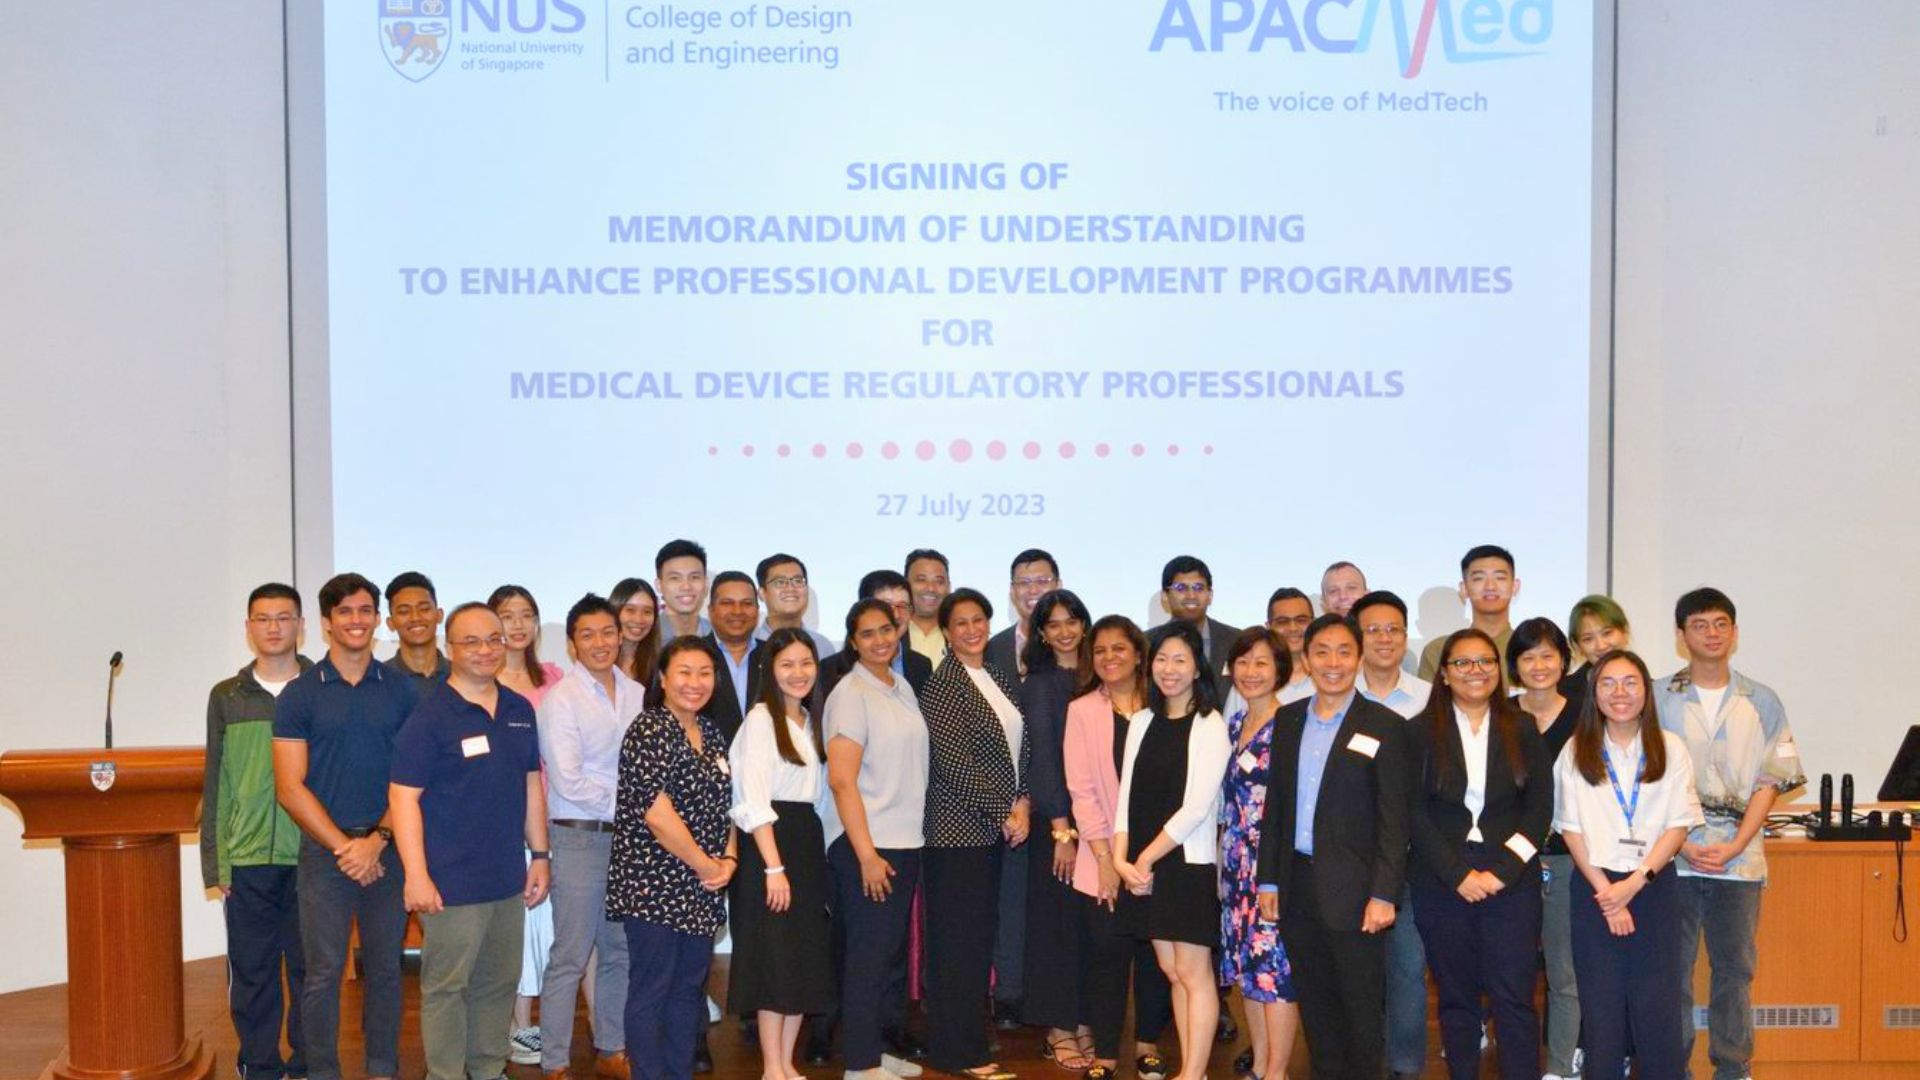 Faculty, APACMed members and NUS alums from the programme Graduate Certificate in Medical Devices Regulatory Affairs witnessed the signing and attended the industry seminar – the first official collaboration between NUS BME and APACMed  